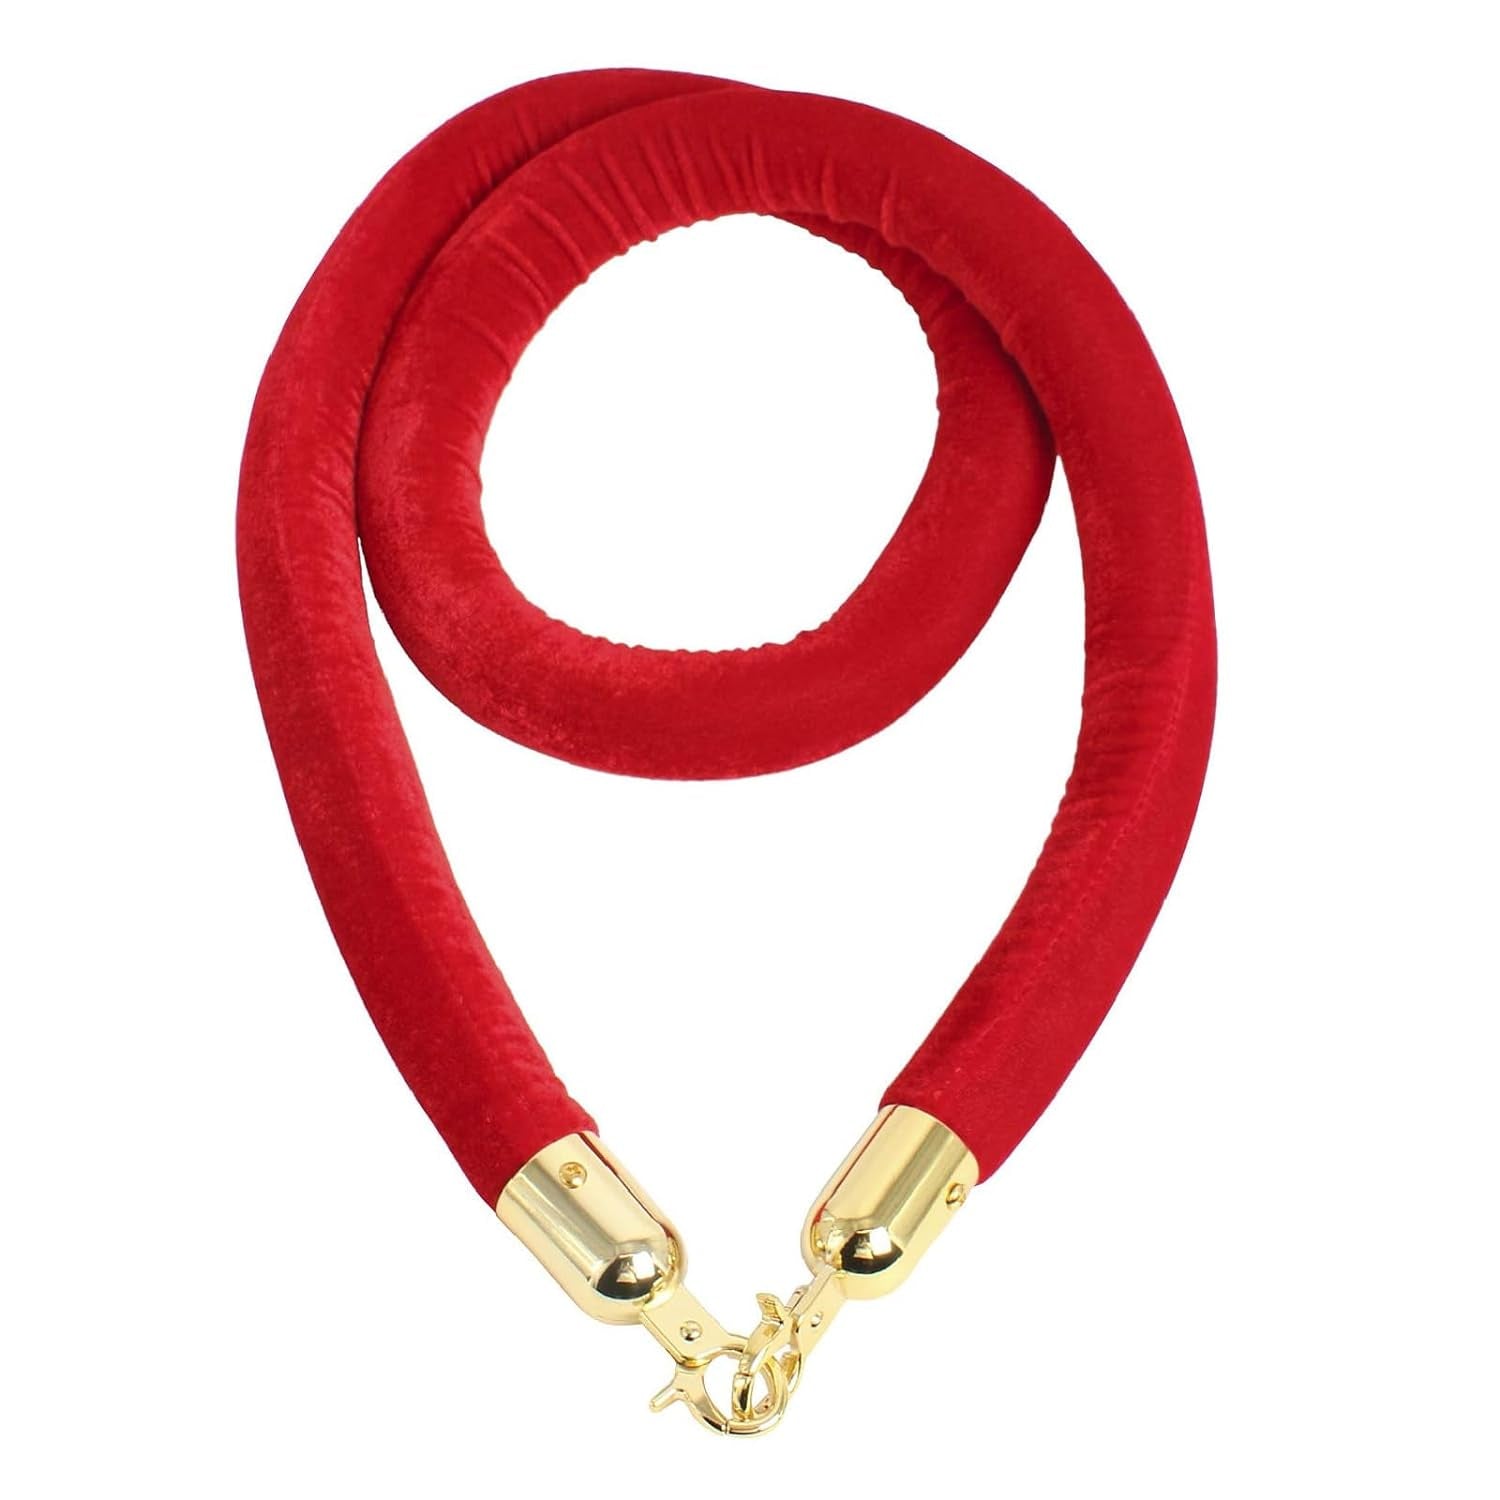 Novelbee 2Pcs Velvet Stanchion Ropes with Gold Hooks,10 Feet Stanchion Queue Barrier Ropes,Crowd Control Velvet Rope Safety Barriers for Party Decorations(Red)